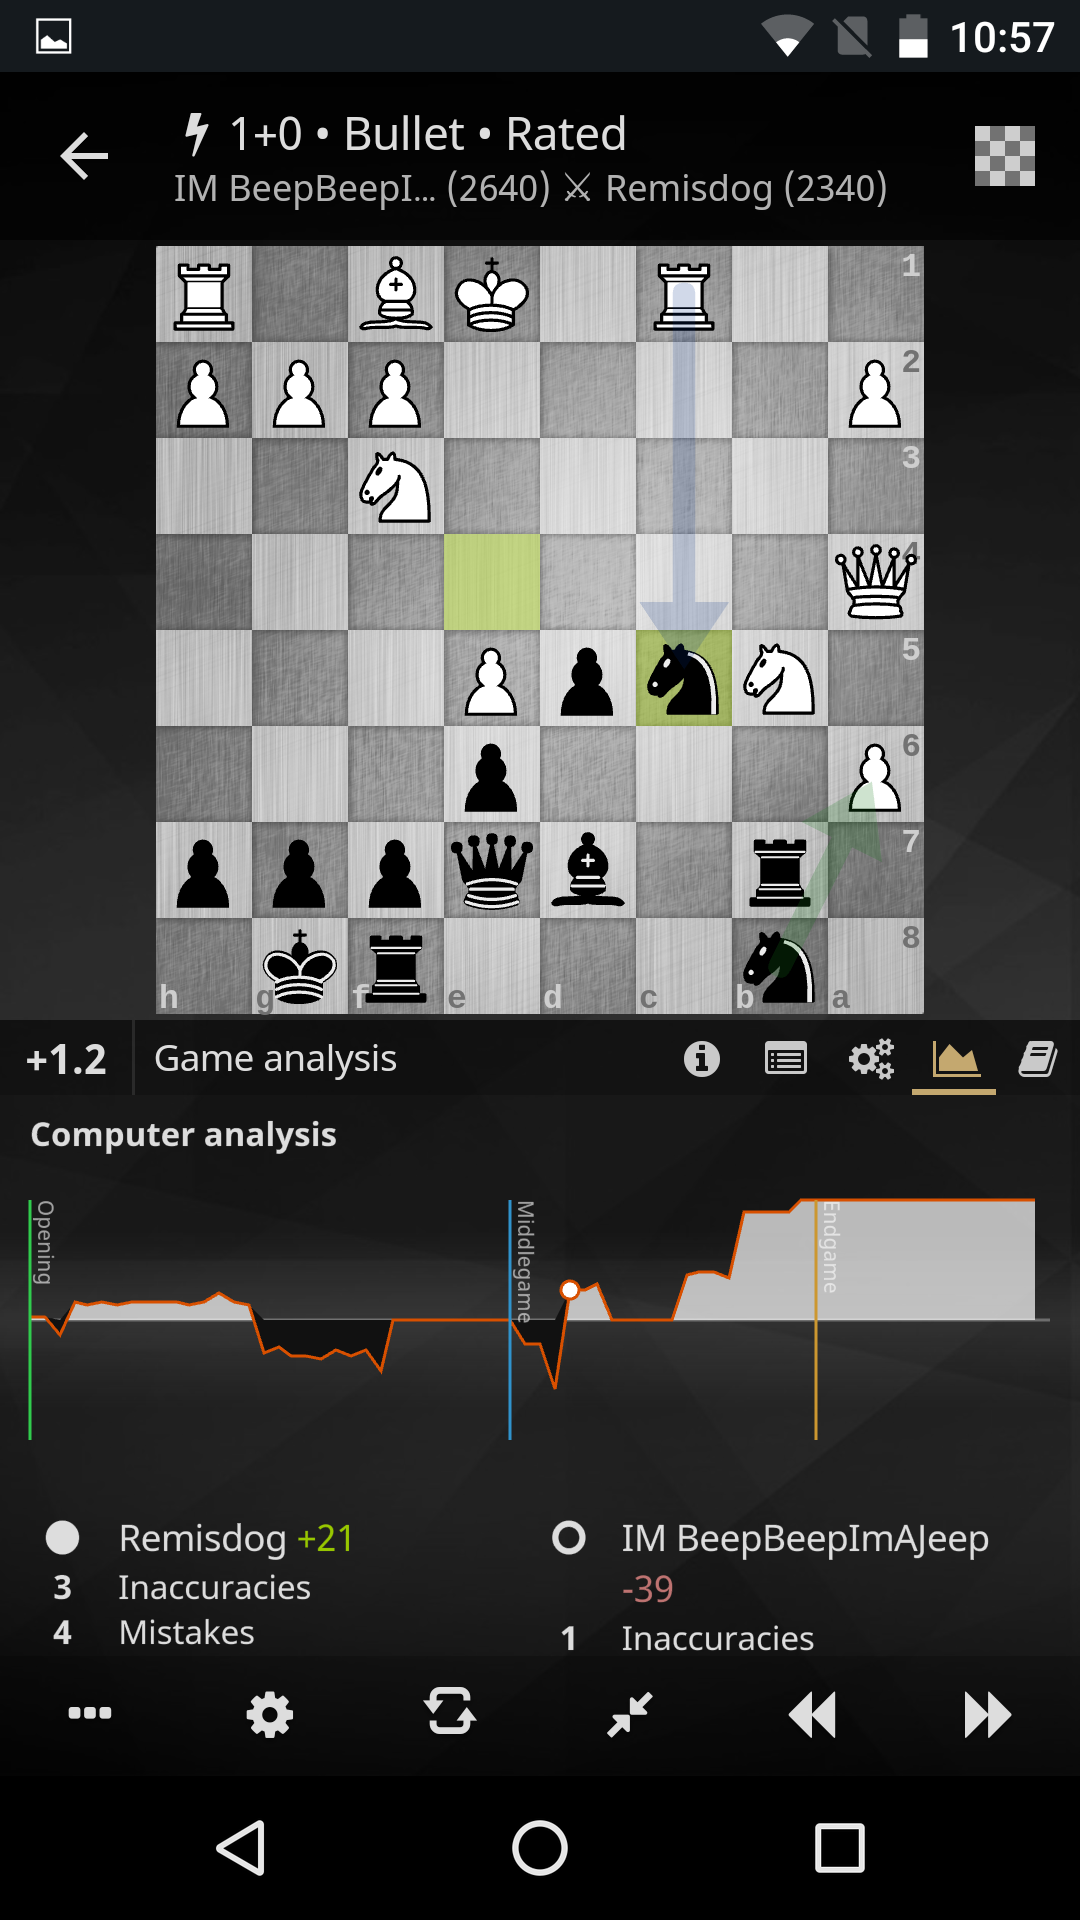 Android application lichess • Free Online Chess screenshort